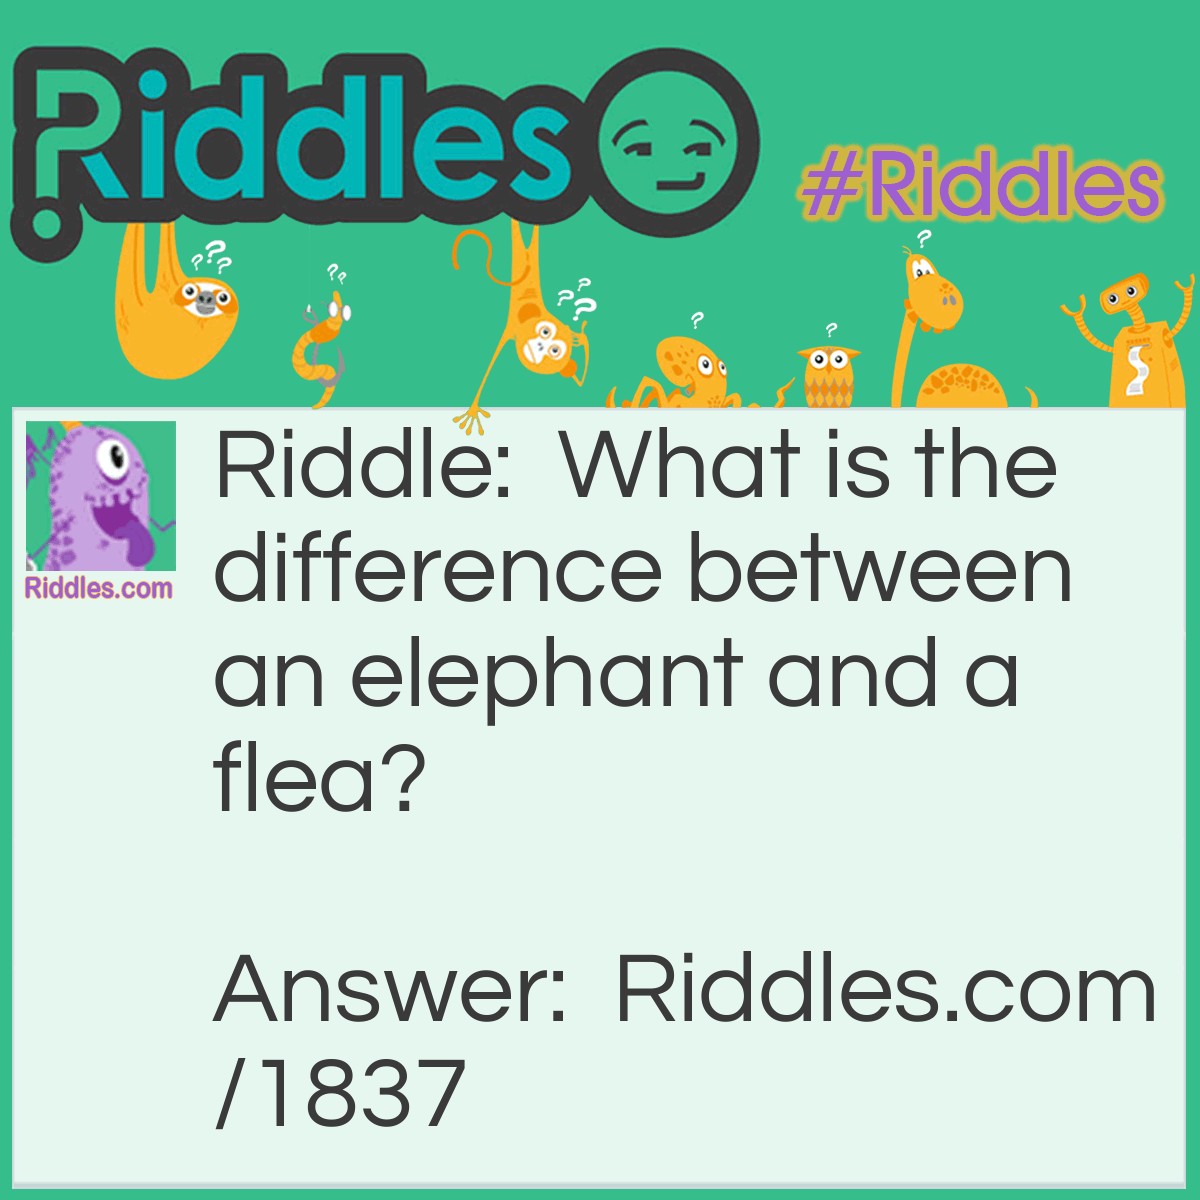 Riddle: What is the difference between an elephant and a flea? Answer: An elephant can have fleas but a flea can't have elephants.